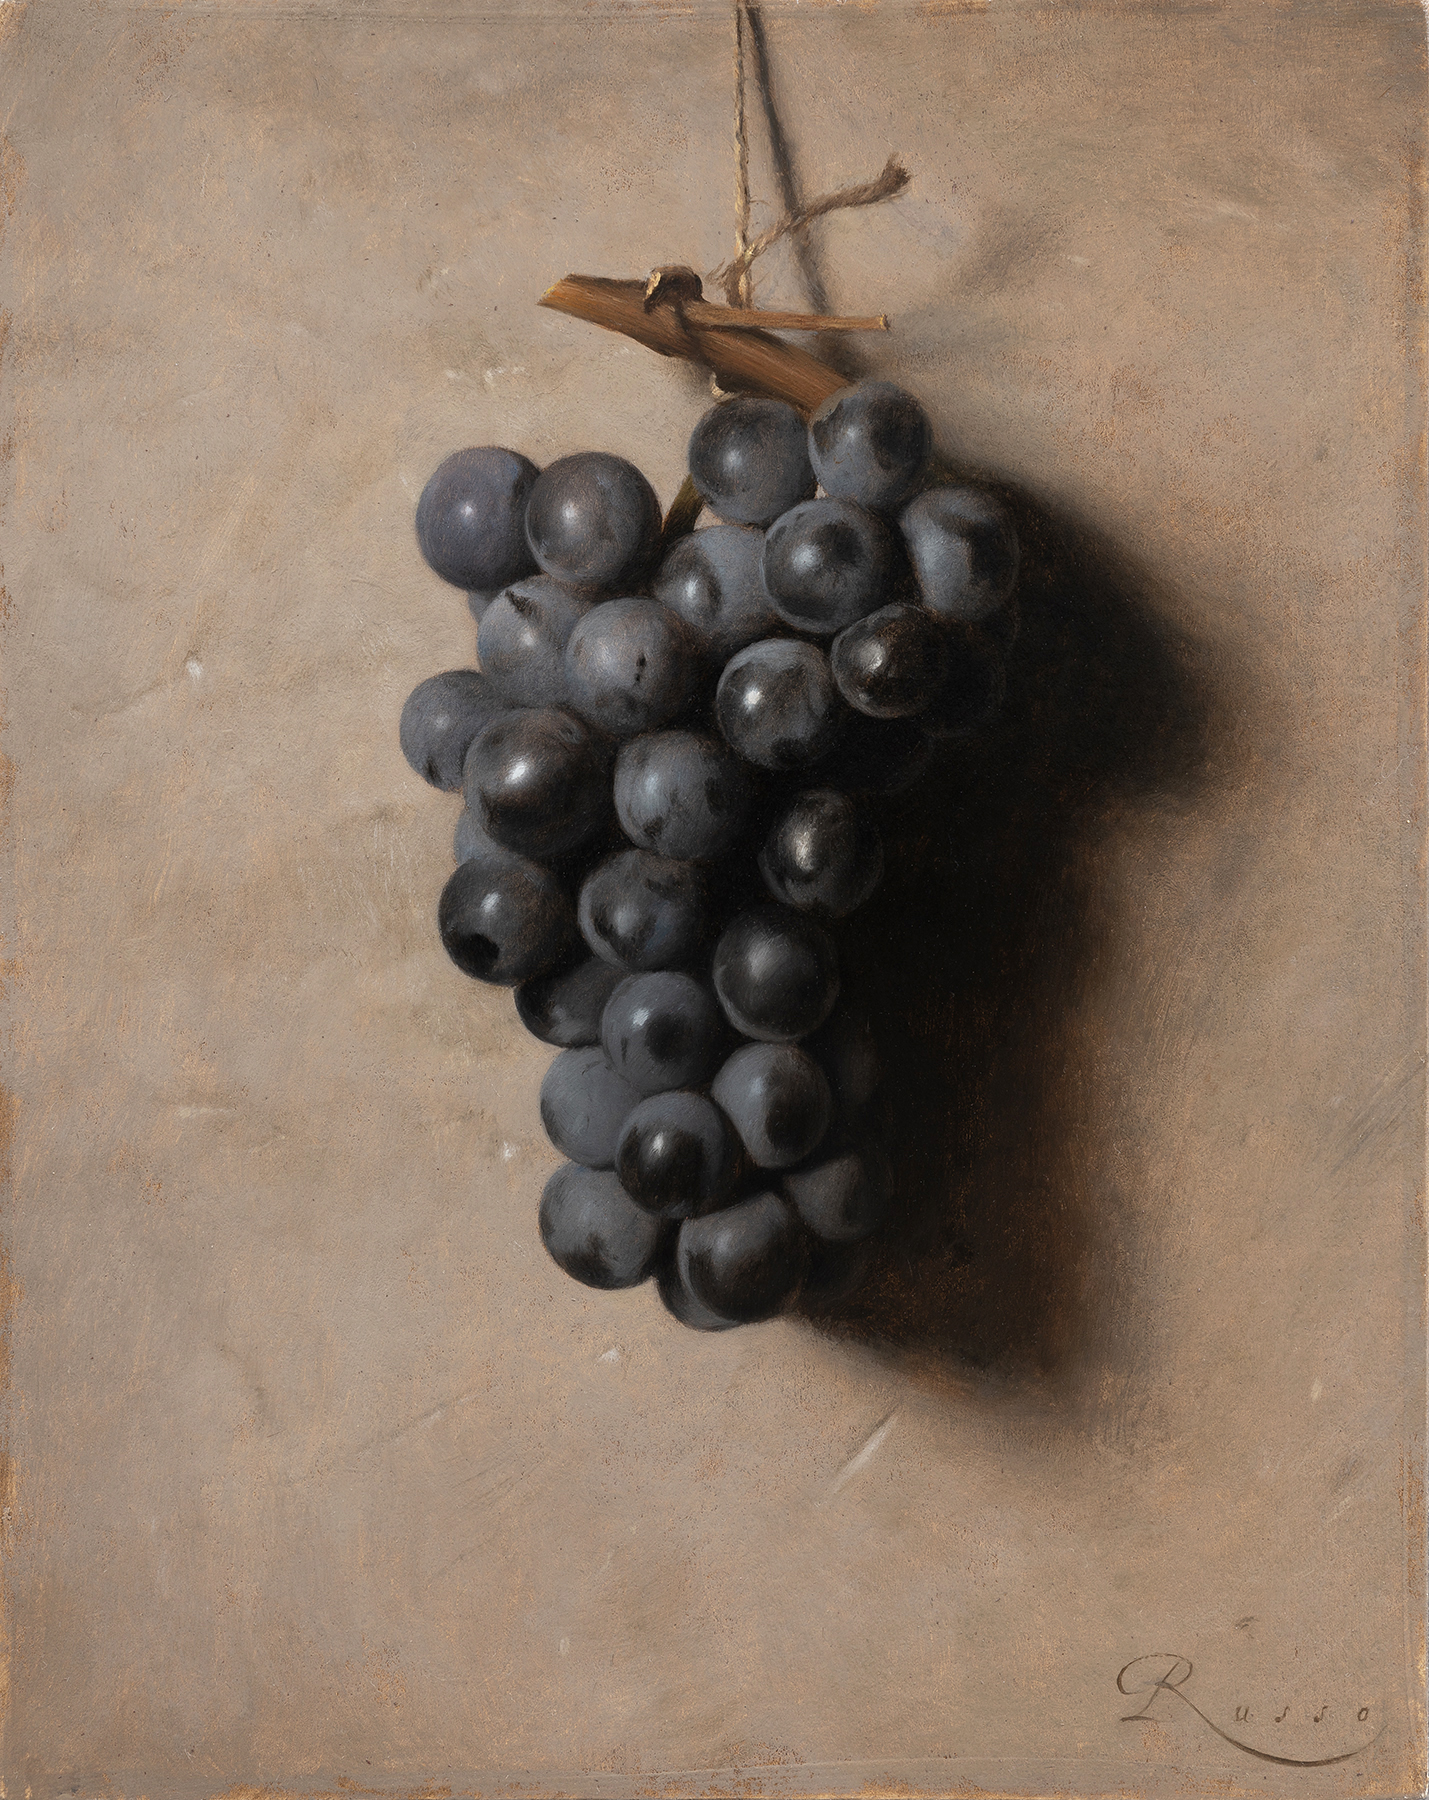 Carlo Russo, "The Last Grapes," 10 x 8 inches, Oil on Panel, 2023